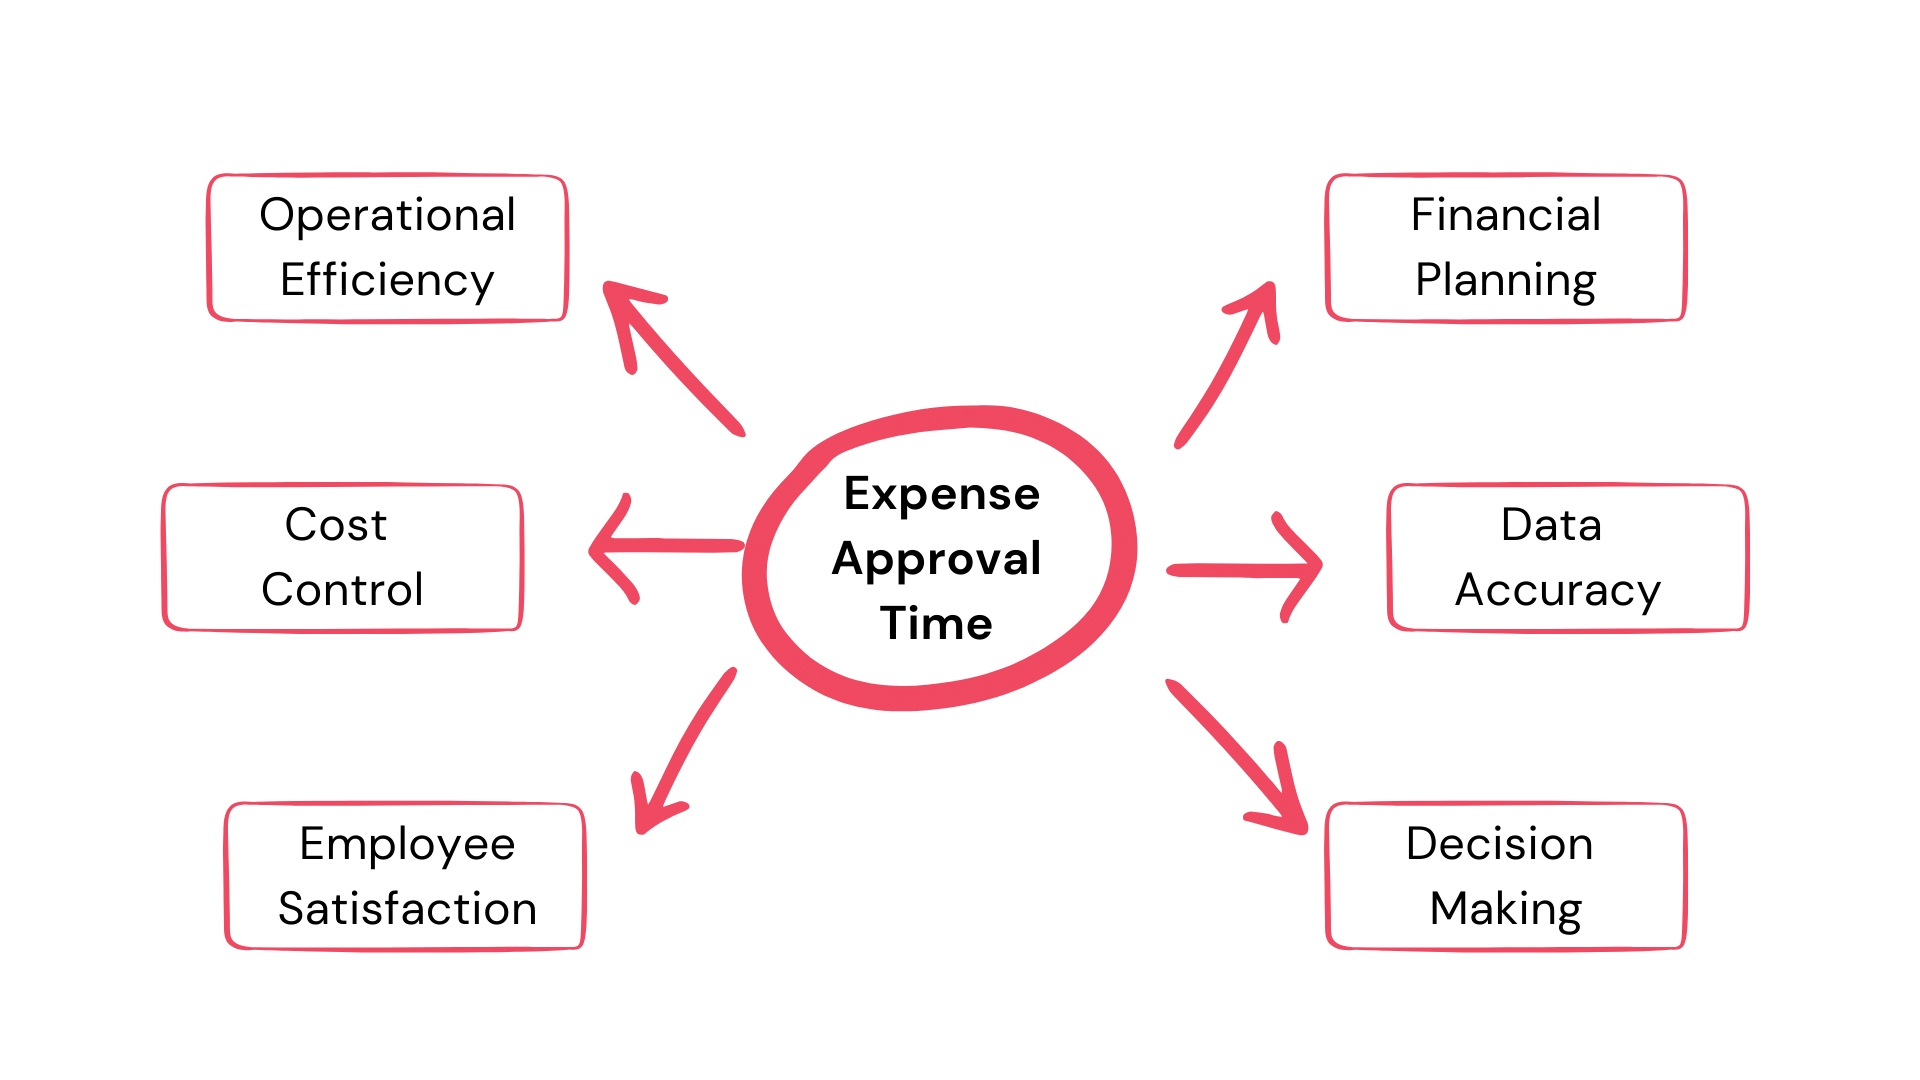 Expense Approval Time